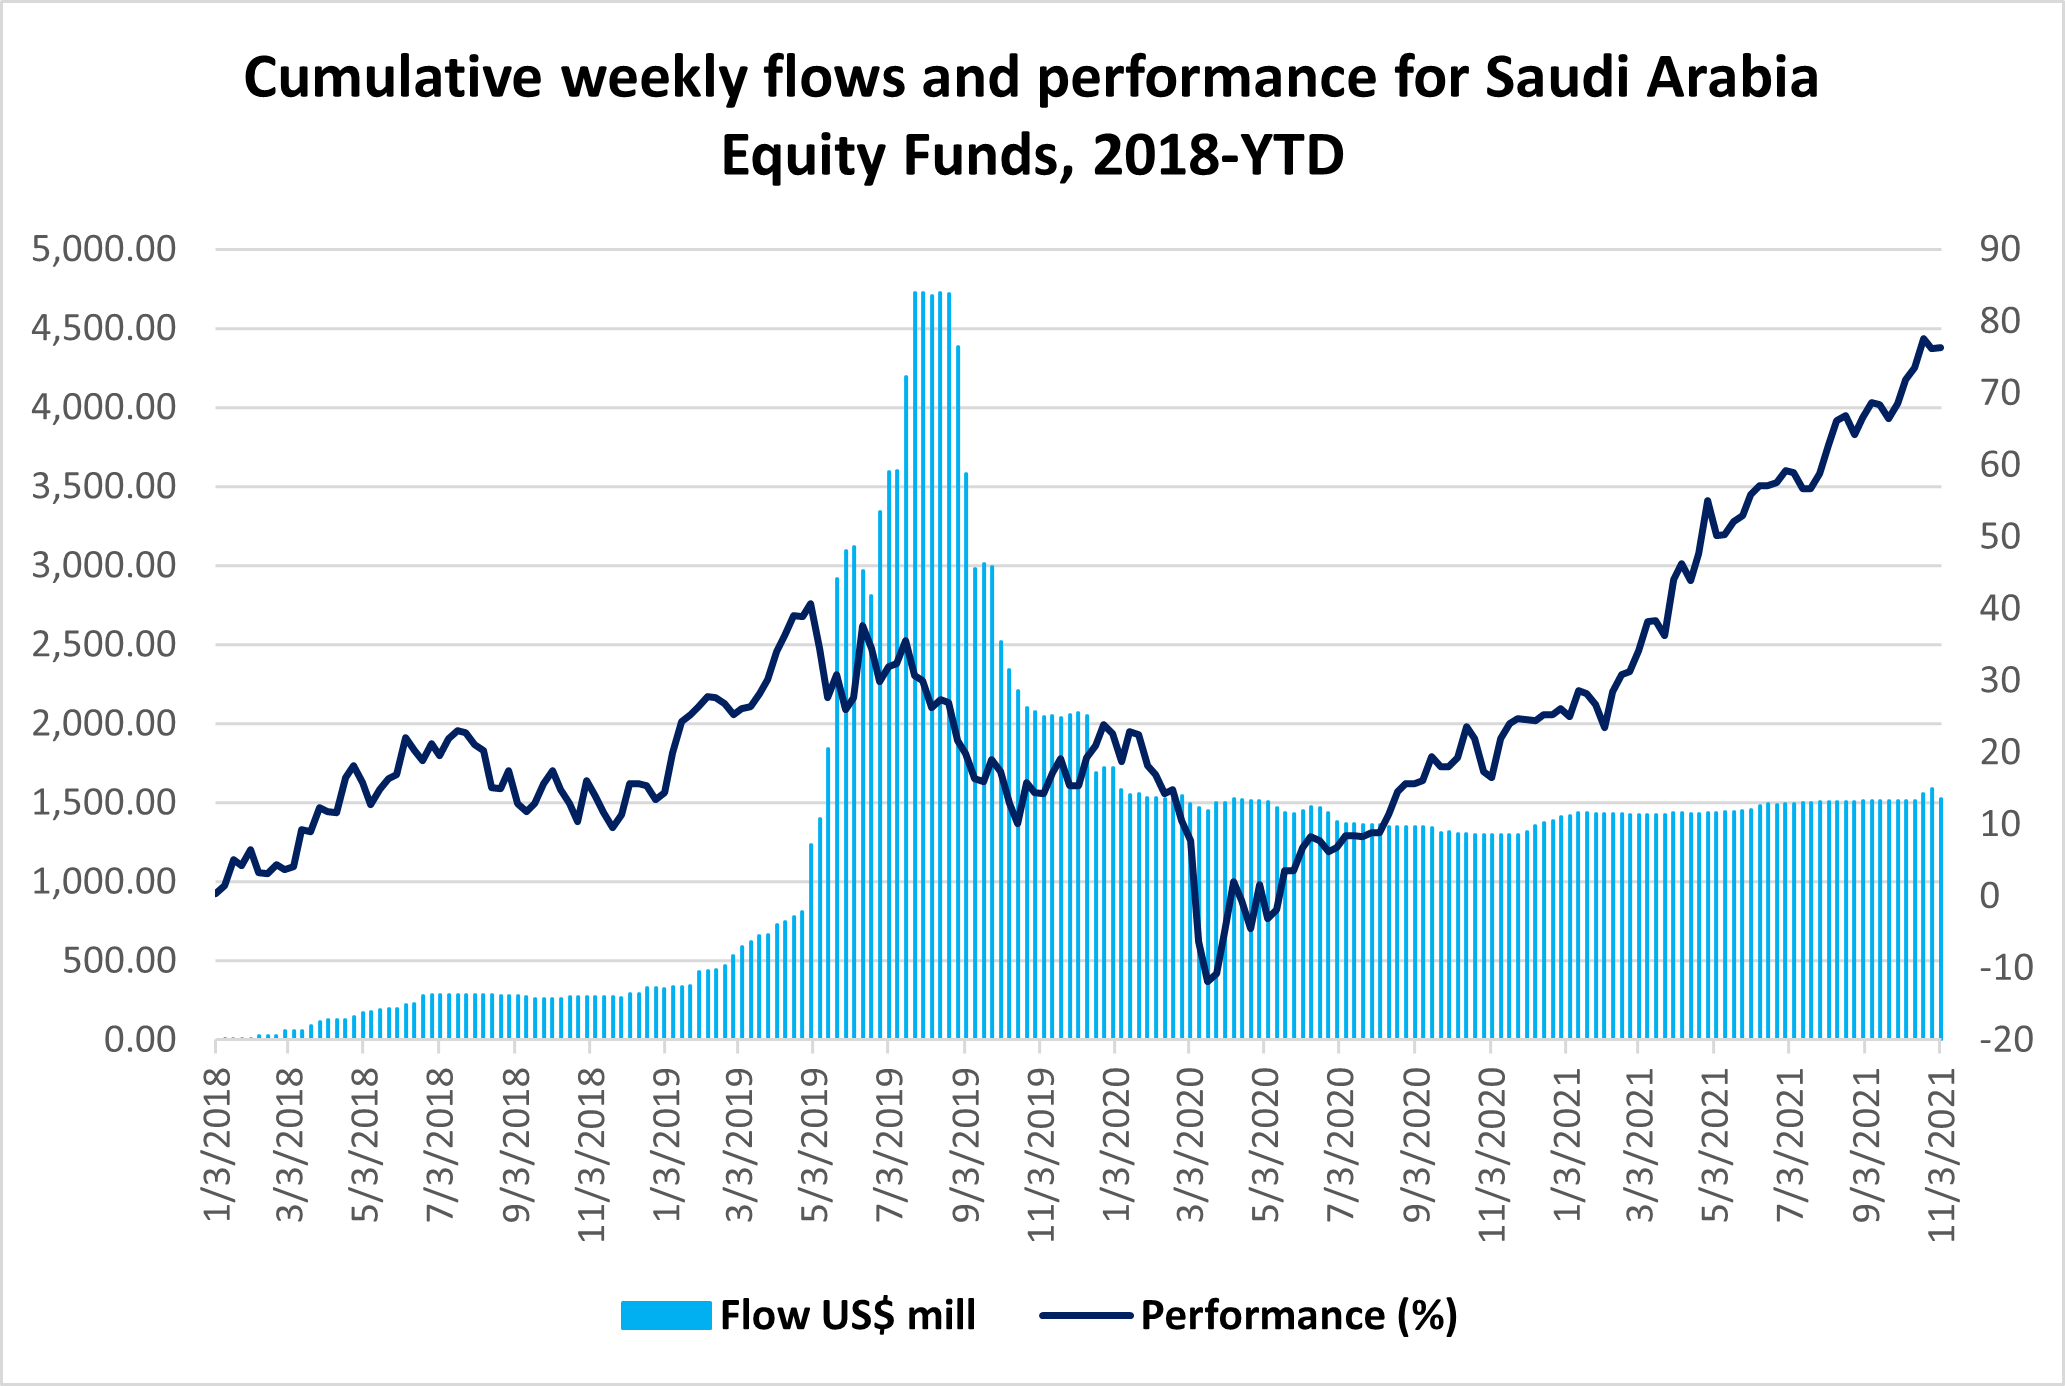 Graph depicting the 'Cumulative weekly flows and performance for Saudi Arabia equity funds, from 2018 to date'.